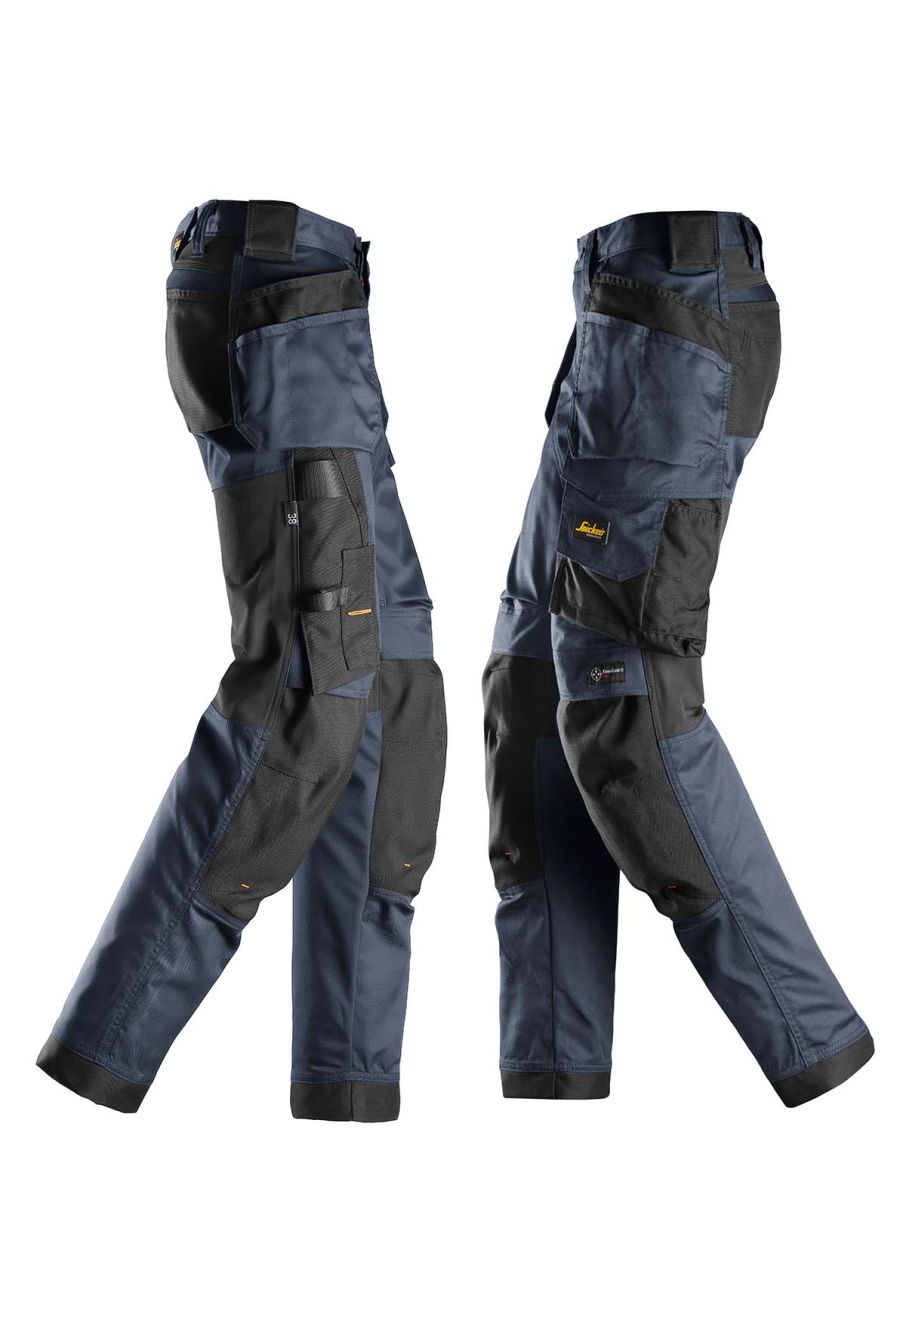 Allround Work Craftsman's Pants, 6241, Stretch Workwear Pants with Holster  Pockets and Slim fit Legs